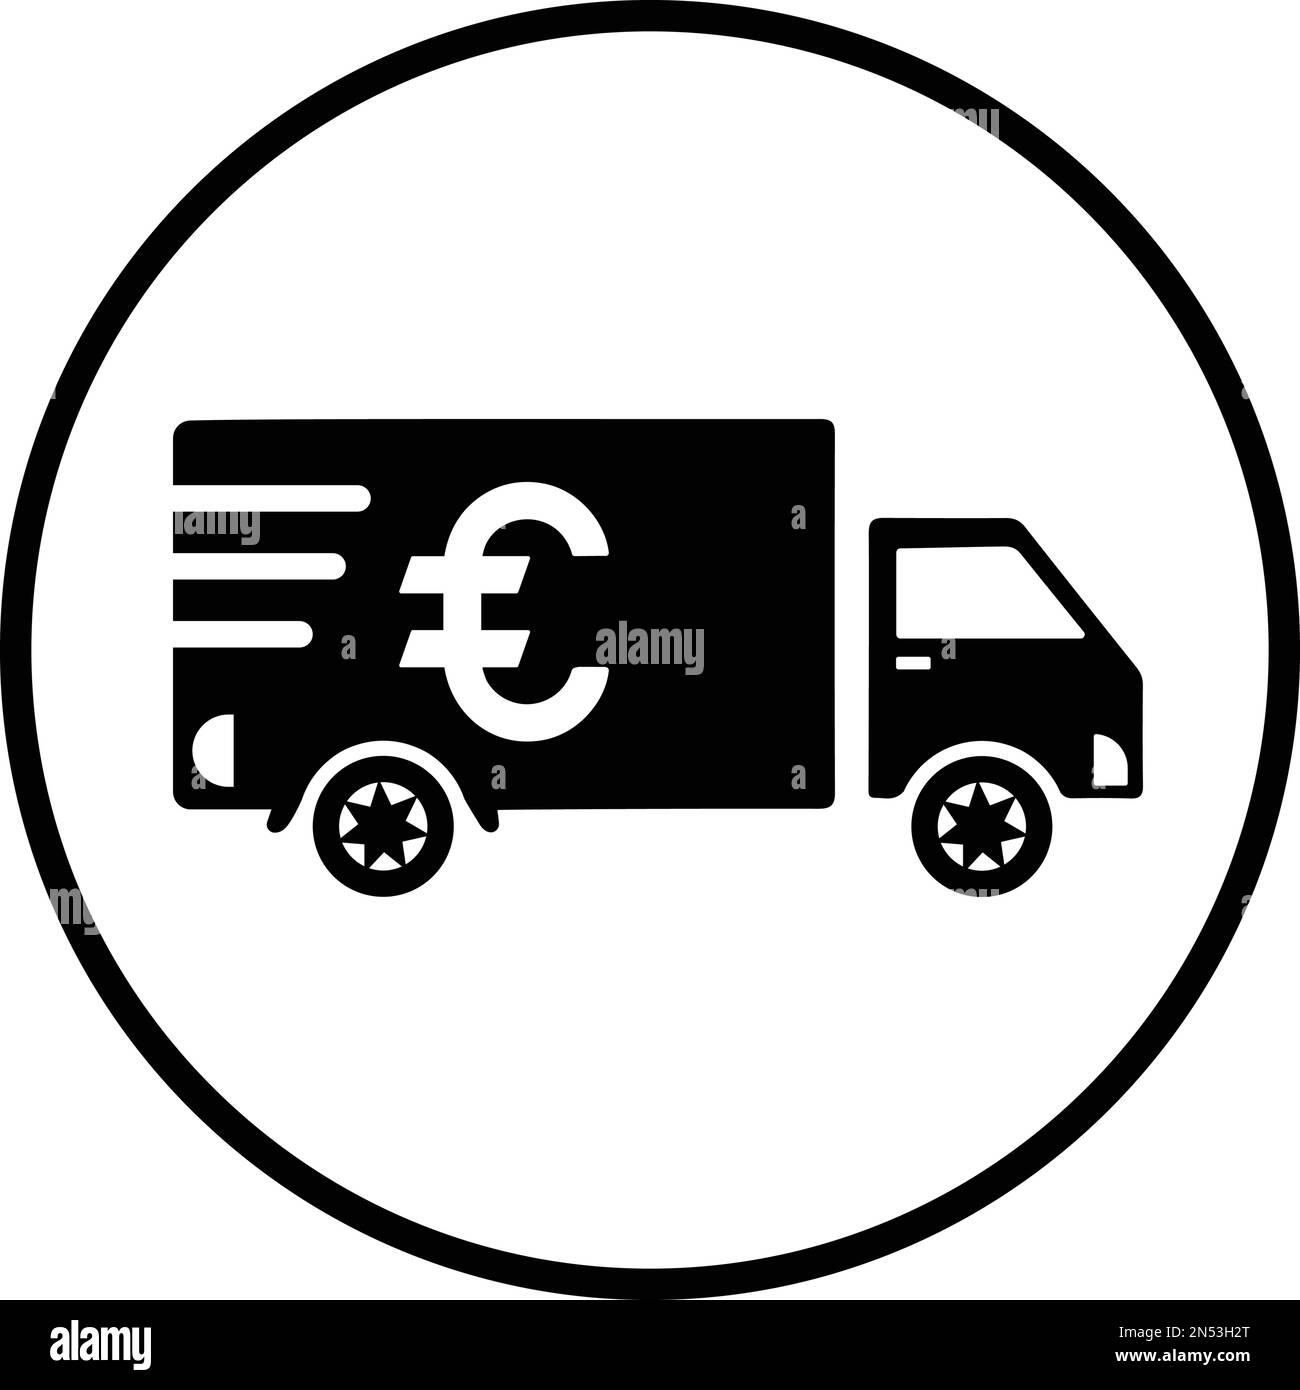 Collector car, euro shipment icon - Vector EPS file. Perfect use for print media, web, stock images, commercial use or any kind of design project. Stock Vector